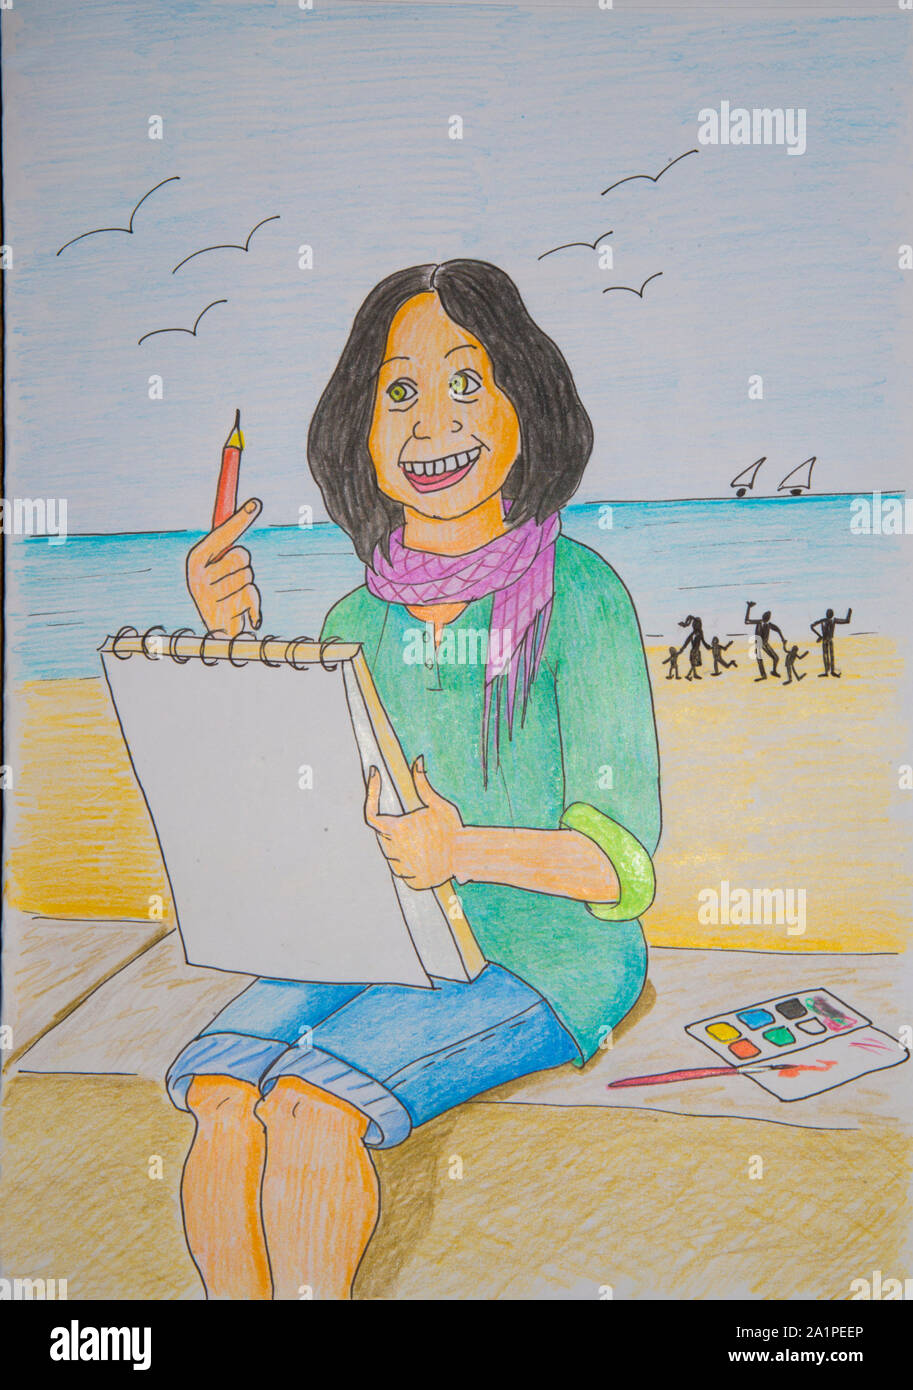 Woman drawing in the beach. Illustration. Stock Photo